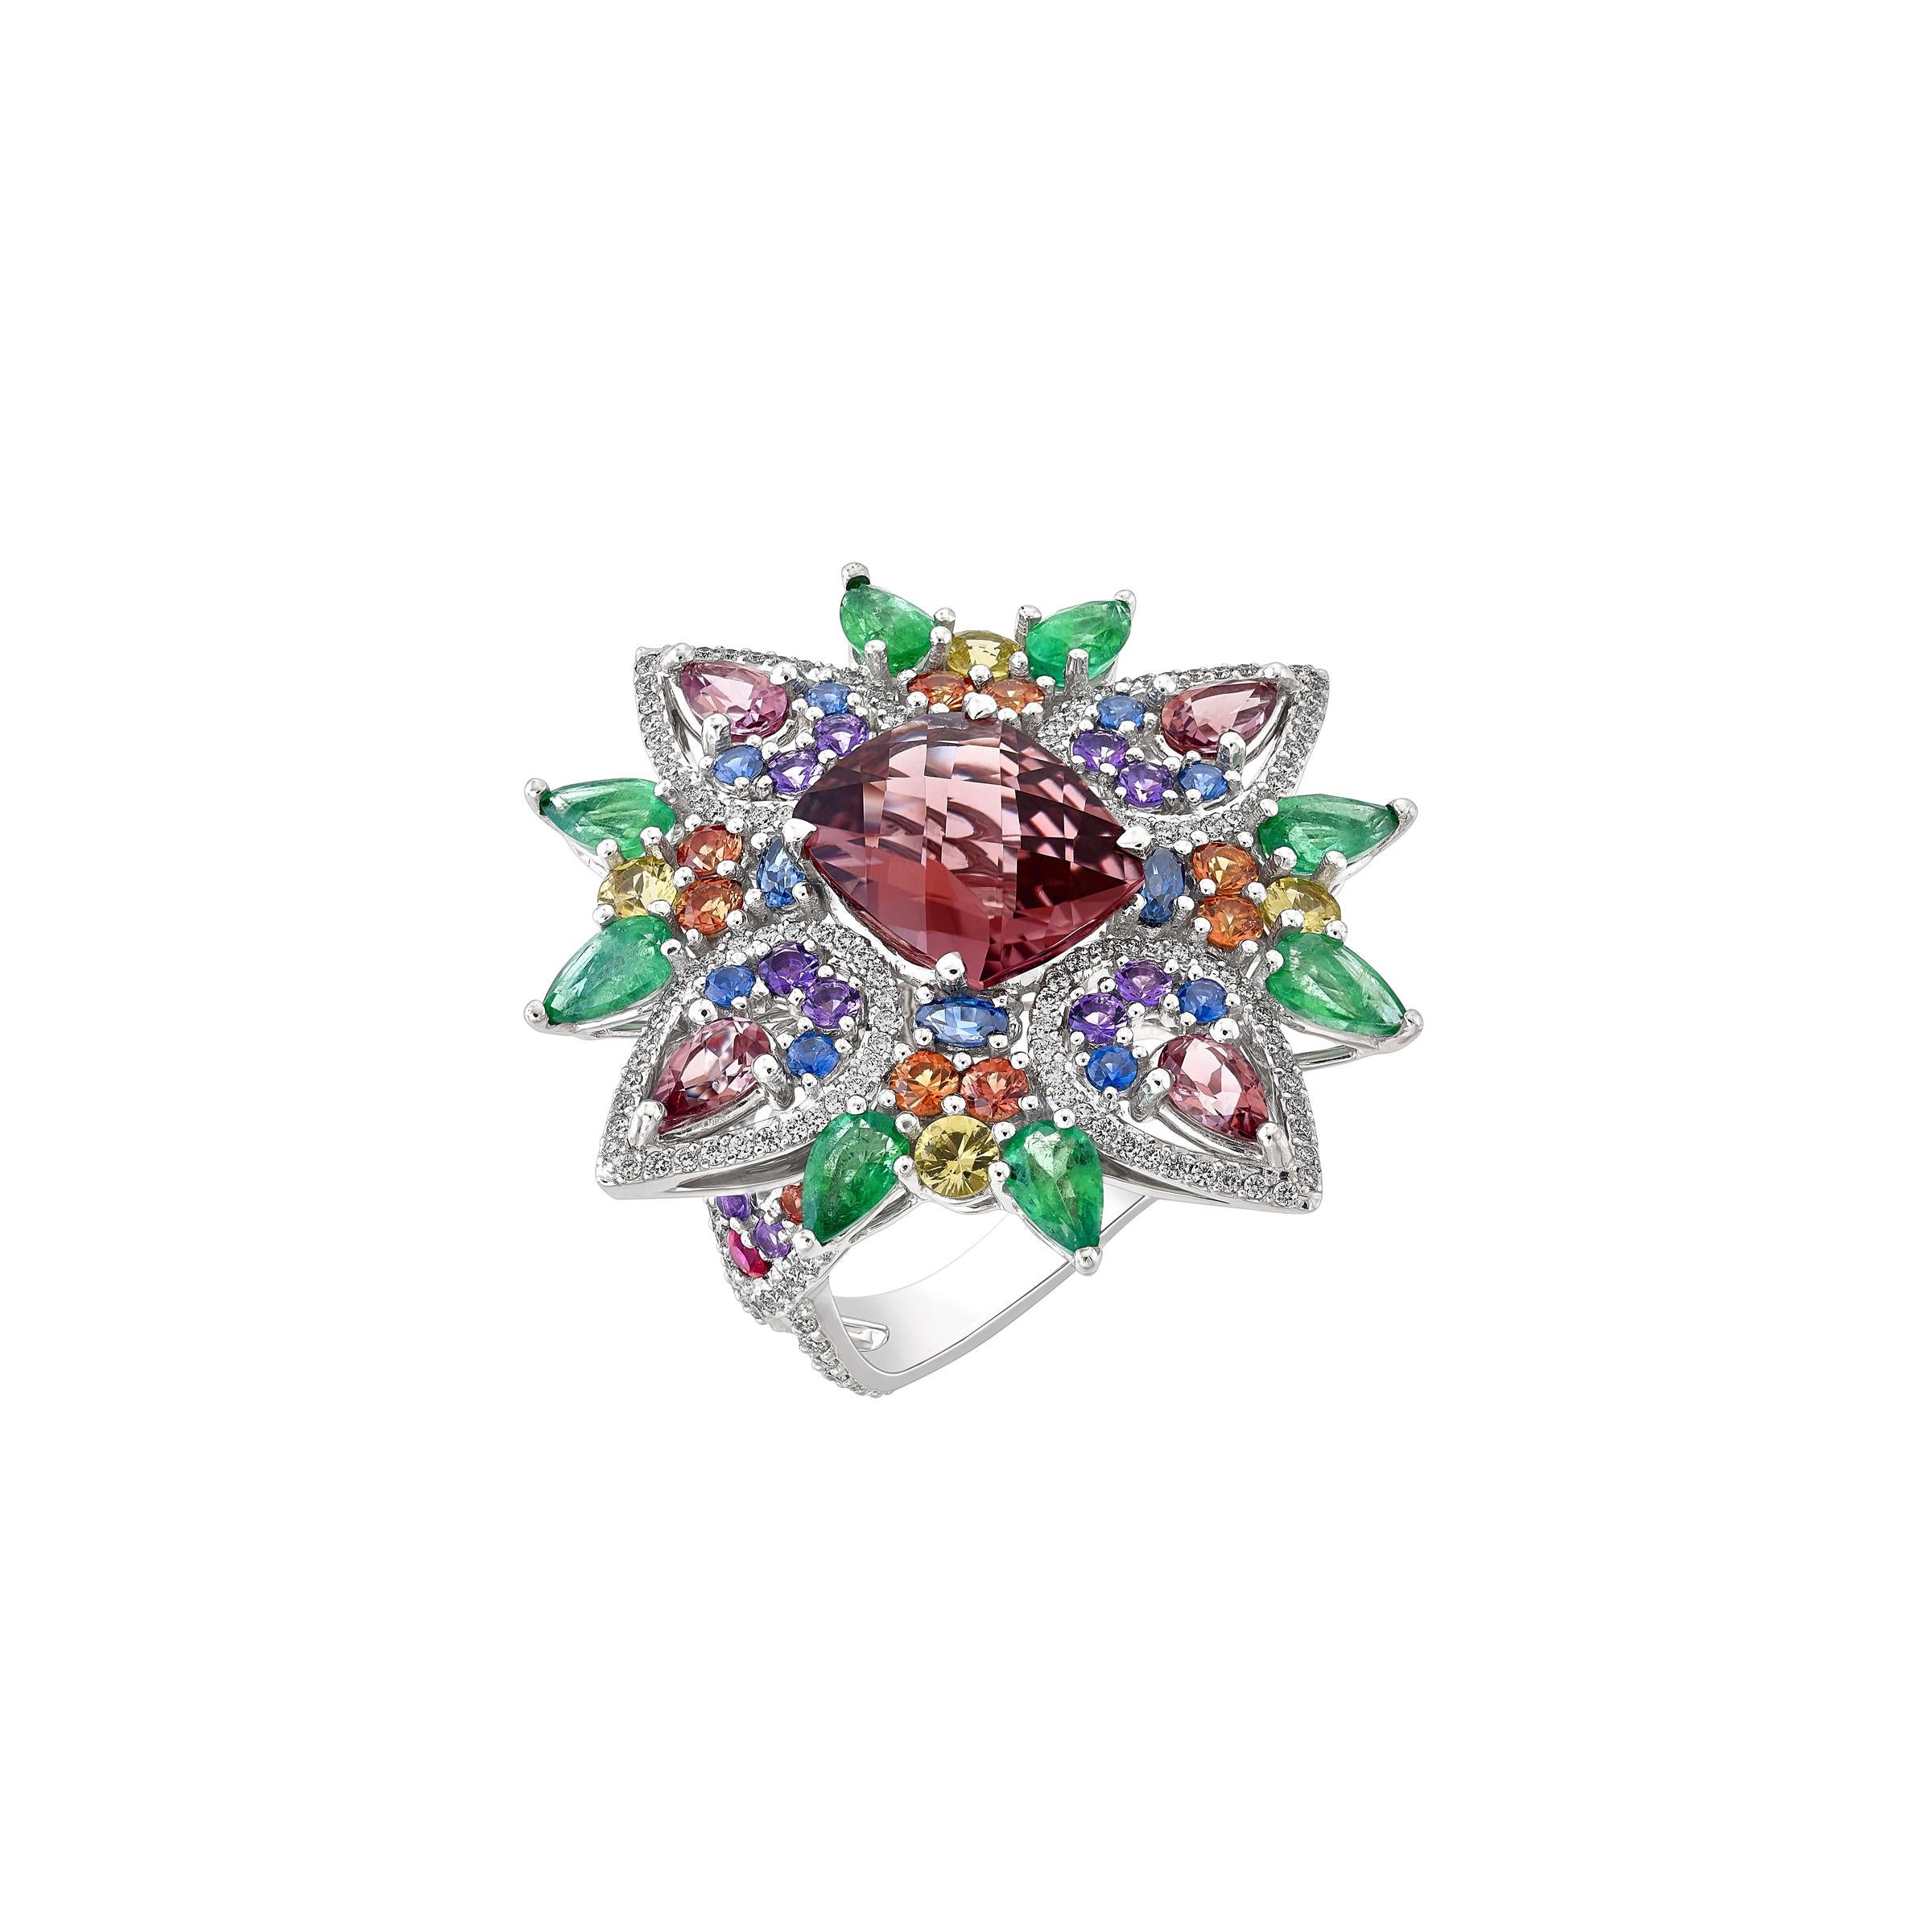 This 18k white gold ring houses a natural loupe clean 3.5 carat pink tourmaline as the centre stone. Inspired by fireworks, the explosion of colors are made with natural and high quality gems. Emeralds, coloured sapphires, diamonds, rubellites and